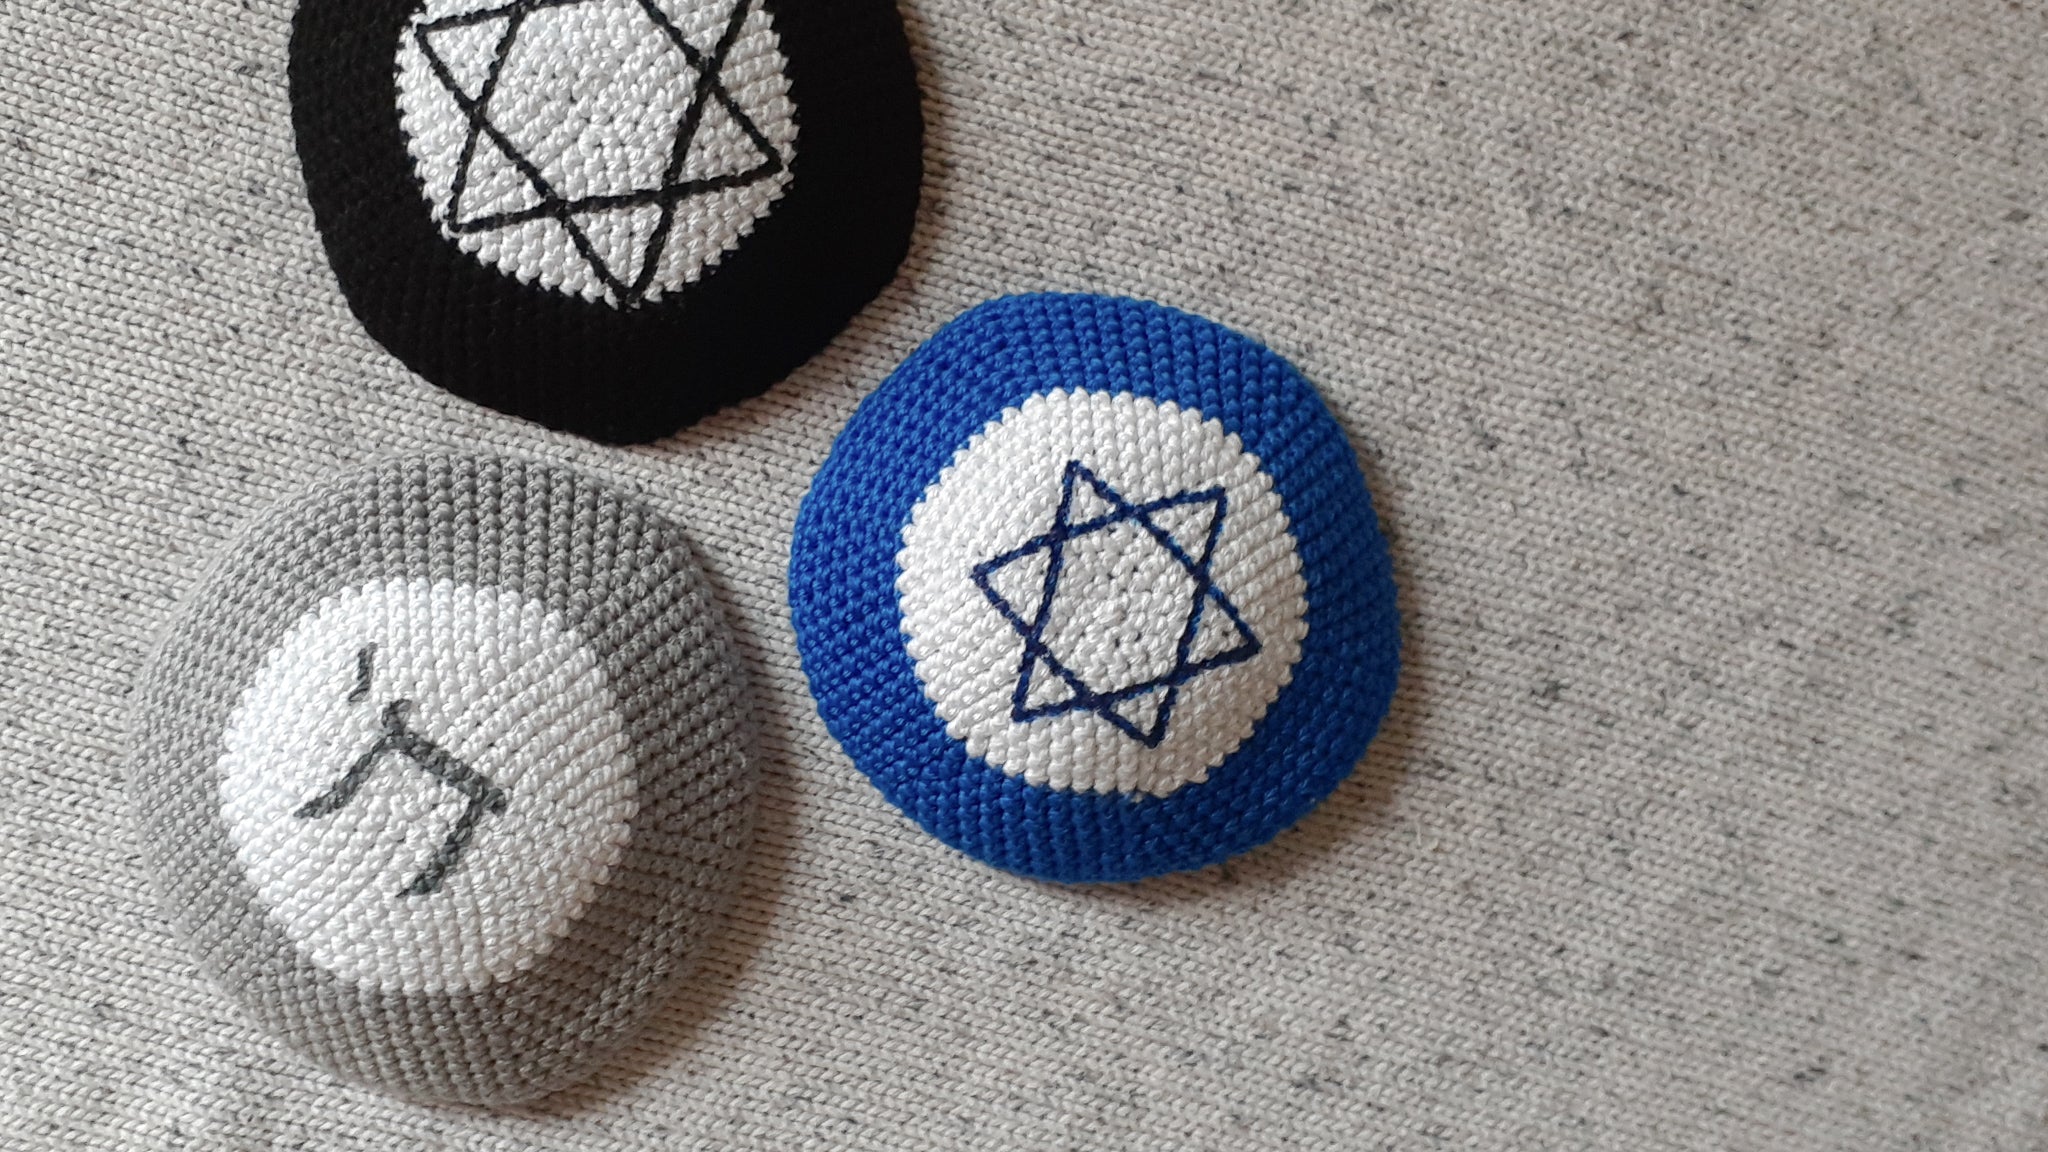 Penelope D Judaica, 3 Jewish Symbol Kippot on a grey knit flatlay. Black & white with a large Magen David, blue & white with a standard Magen David & grey and white Chai colour combination.